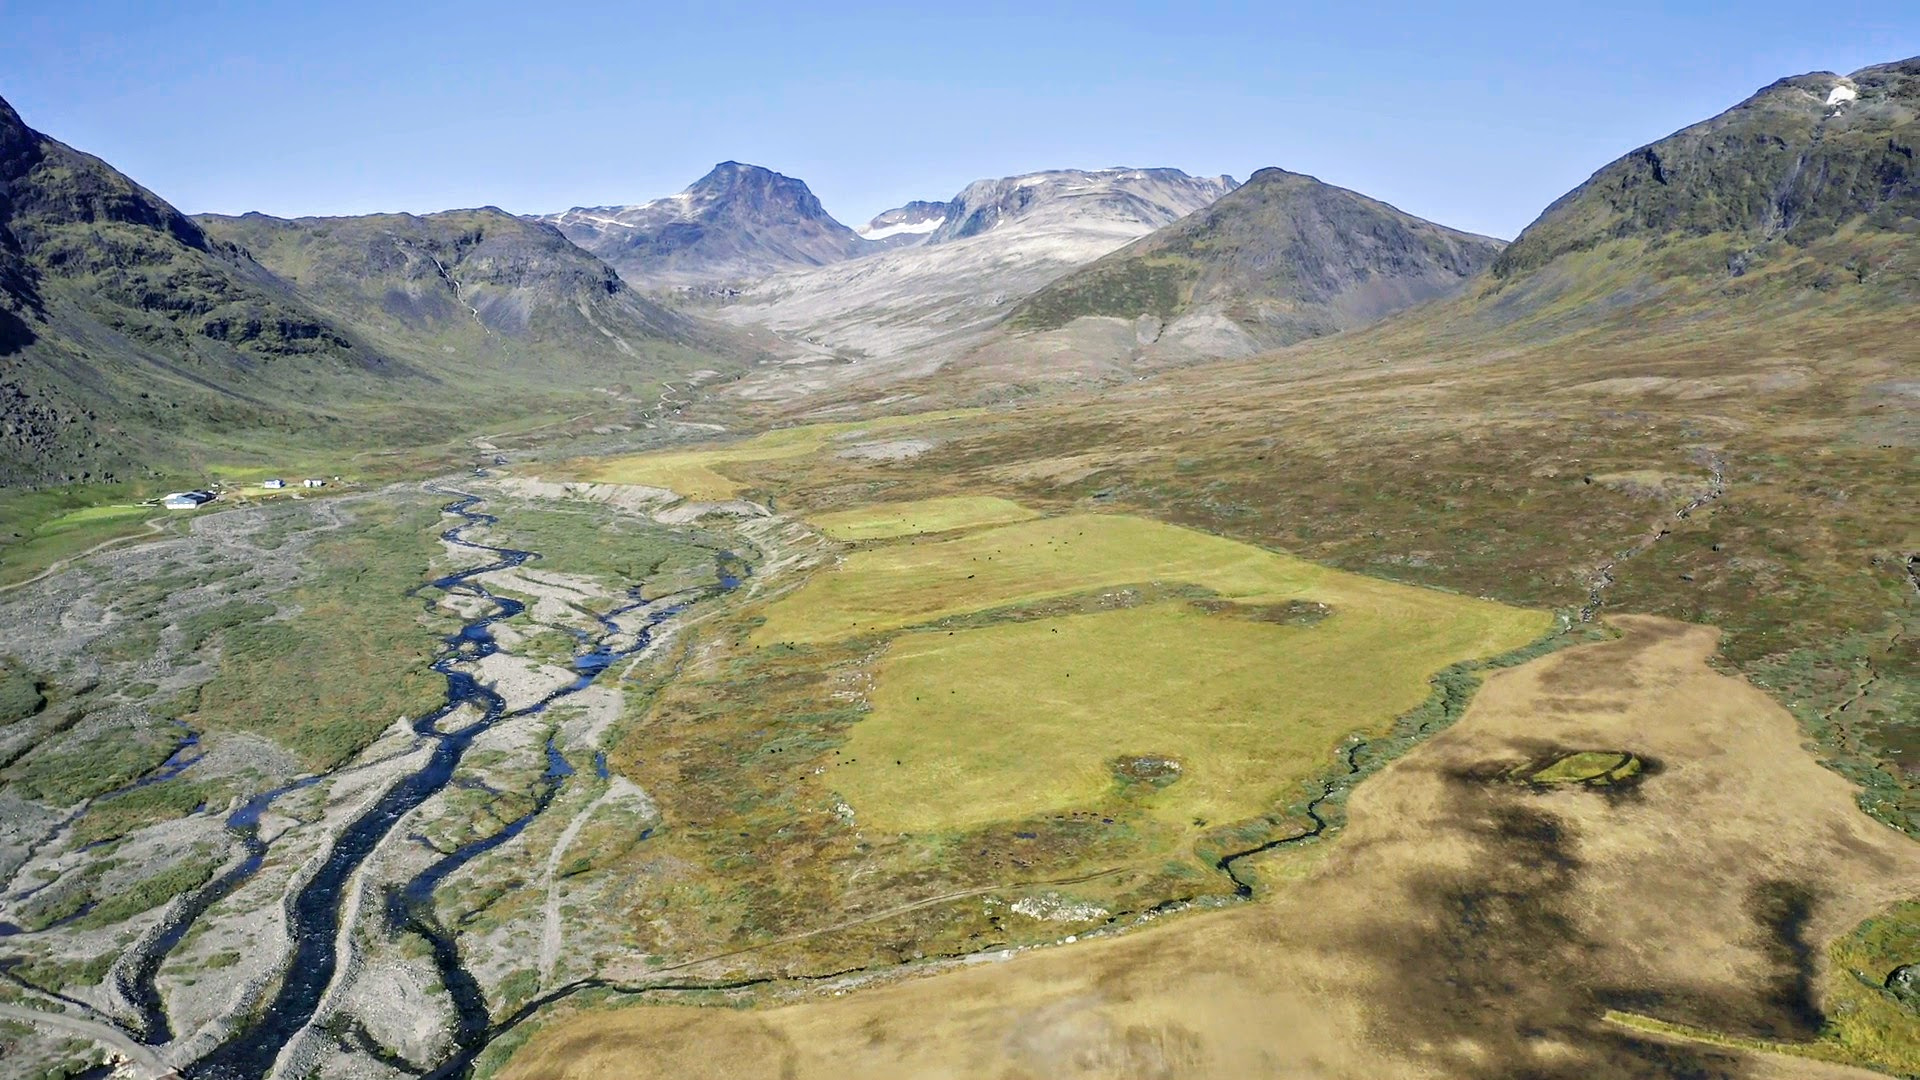 View of the Narsaq Valley in southern Greenland toward Kvanefjeld mountain, one of the worldÕs biggest deposits of rare earth elements and the site of a proposed mine planned to be developed by Australian-listed company Greenland Minerals, in this undated September 2020 handout photo. Greenland Minerals Ltd/Handout via REUTERS/File Photo